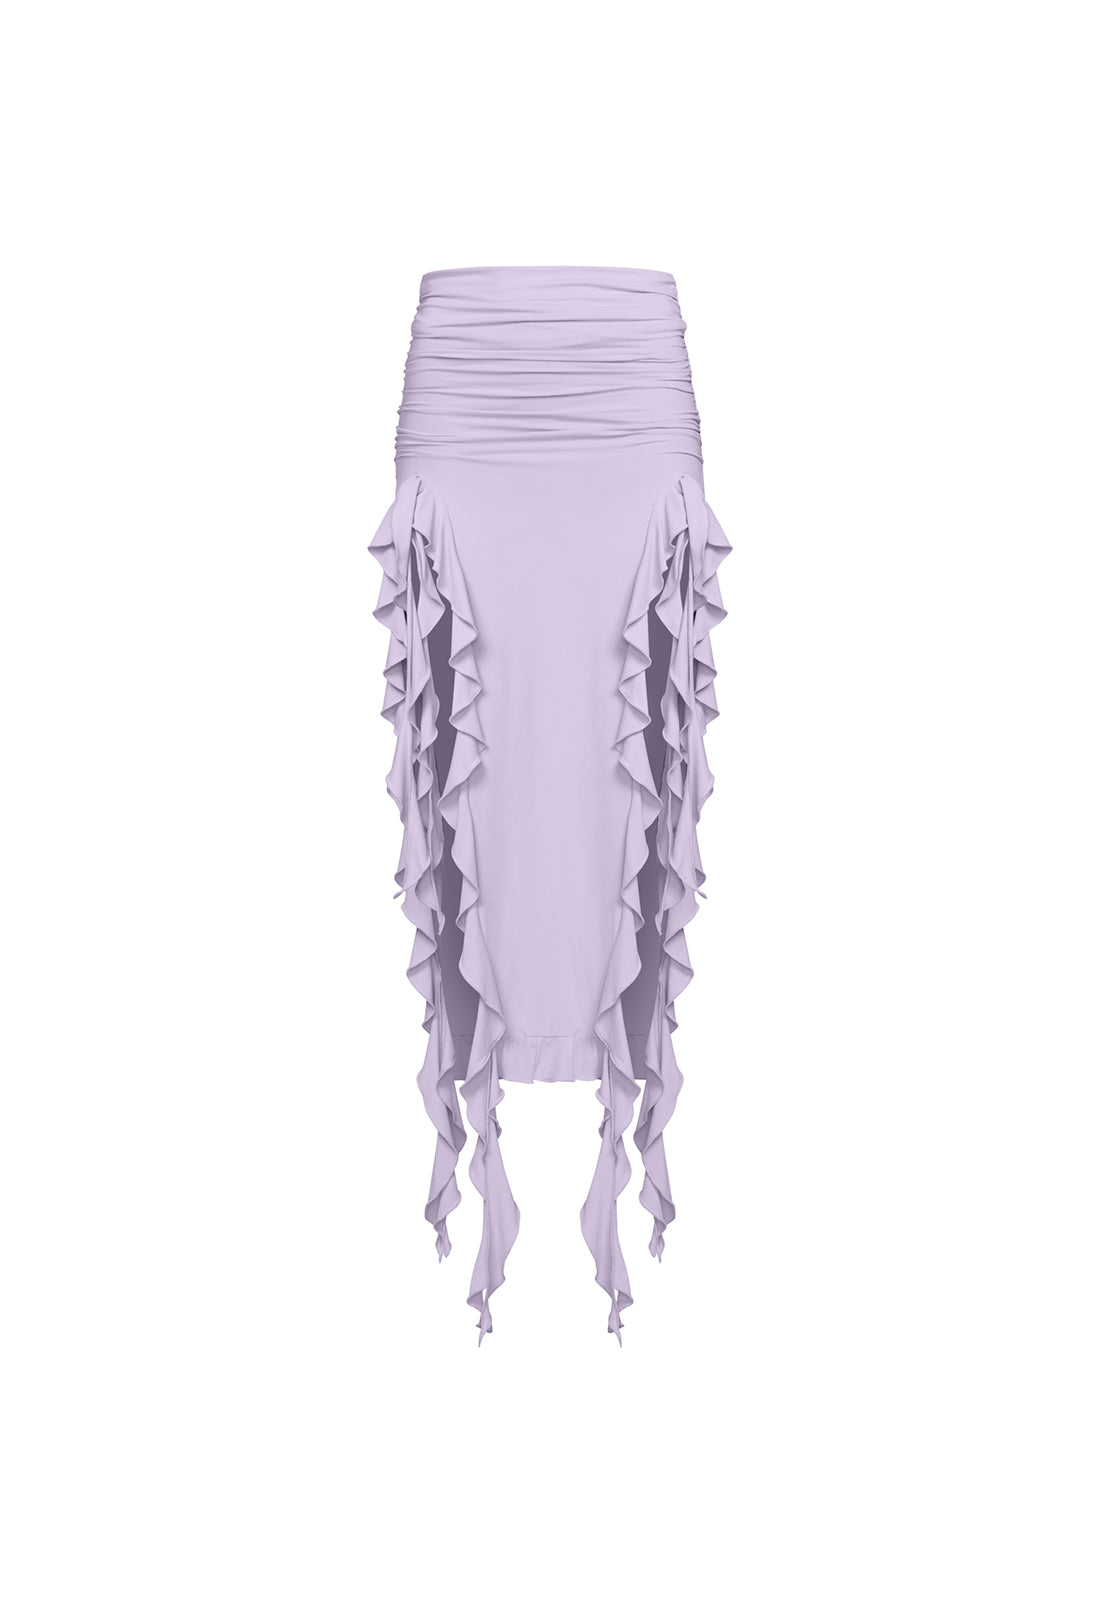 RENDEZVOUS SKIRT - LILAC